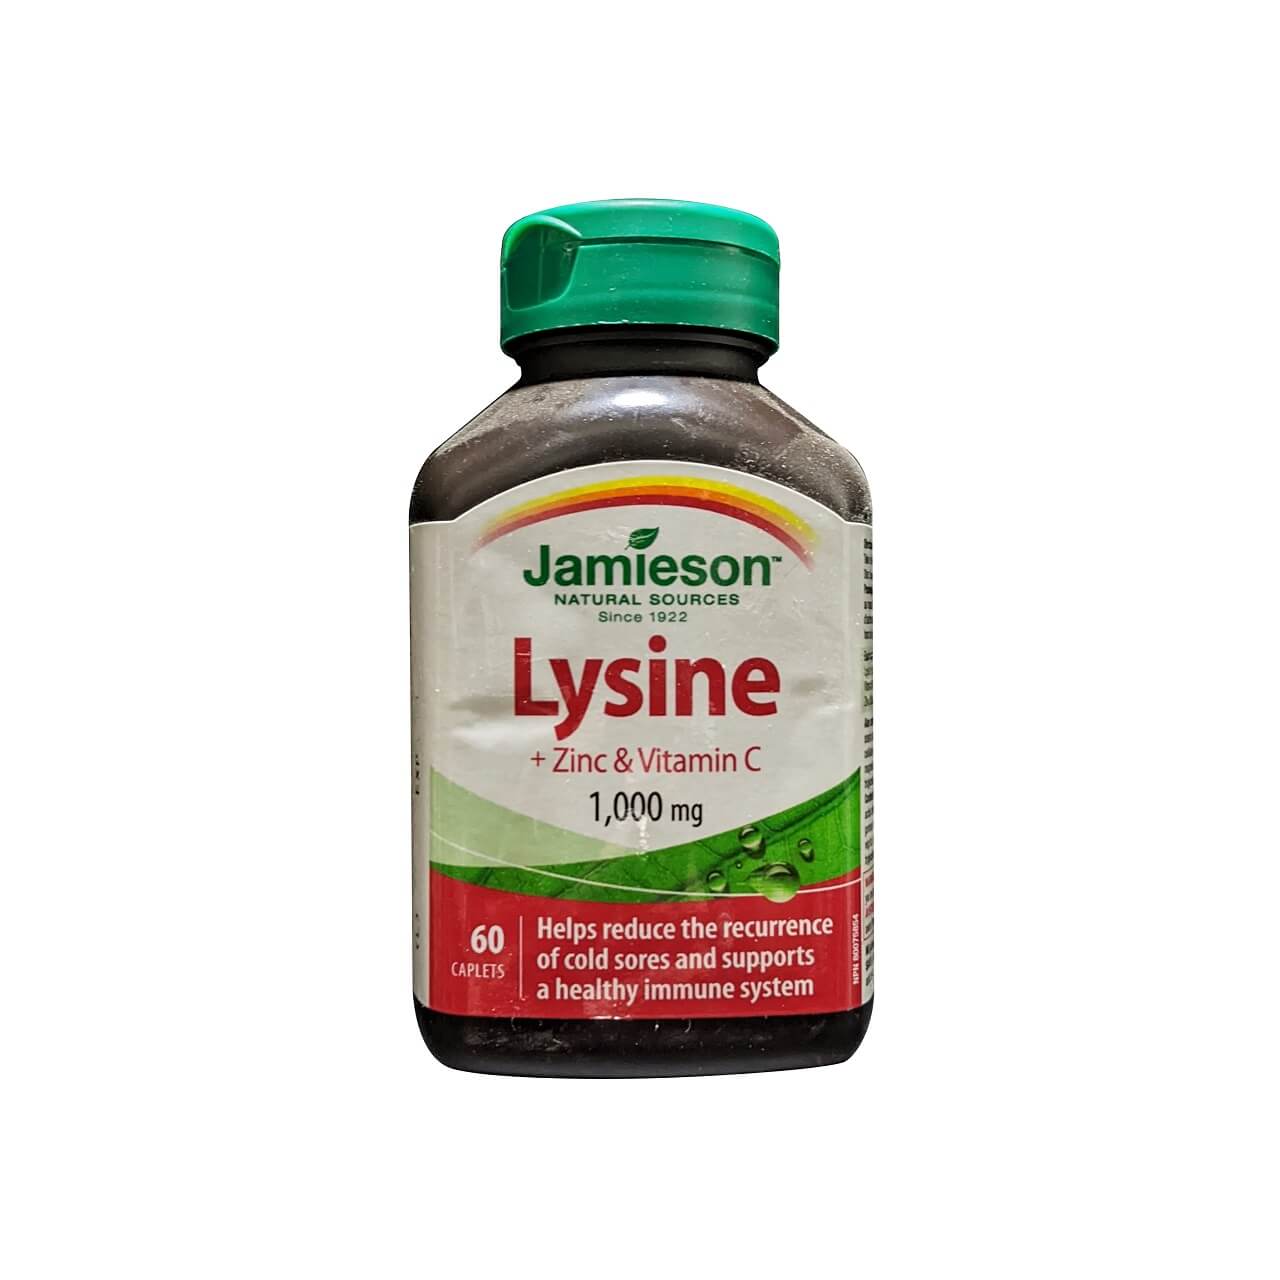 Product label for Jamieson Lysine plus Zinc and Vitamin C (60 caplets) in English